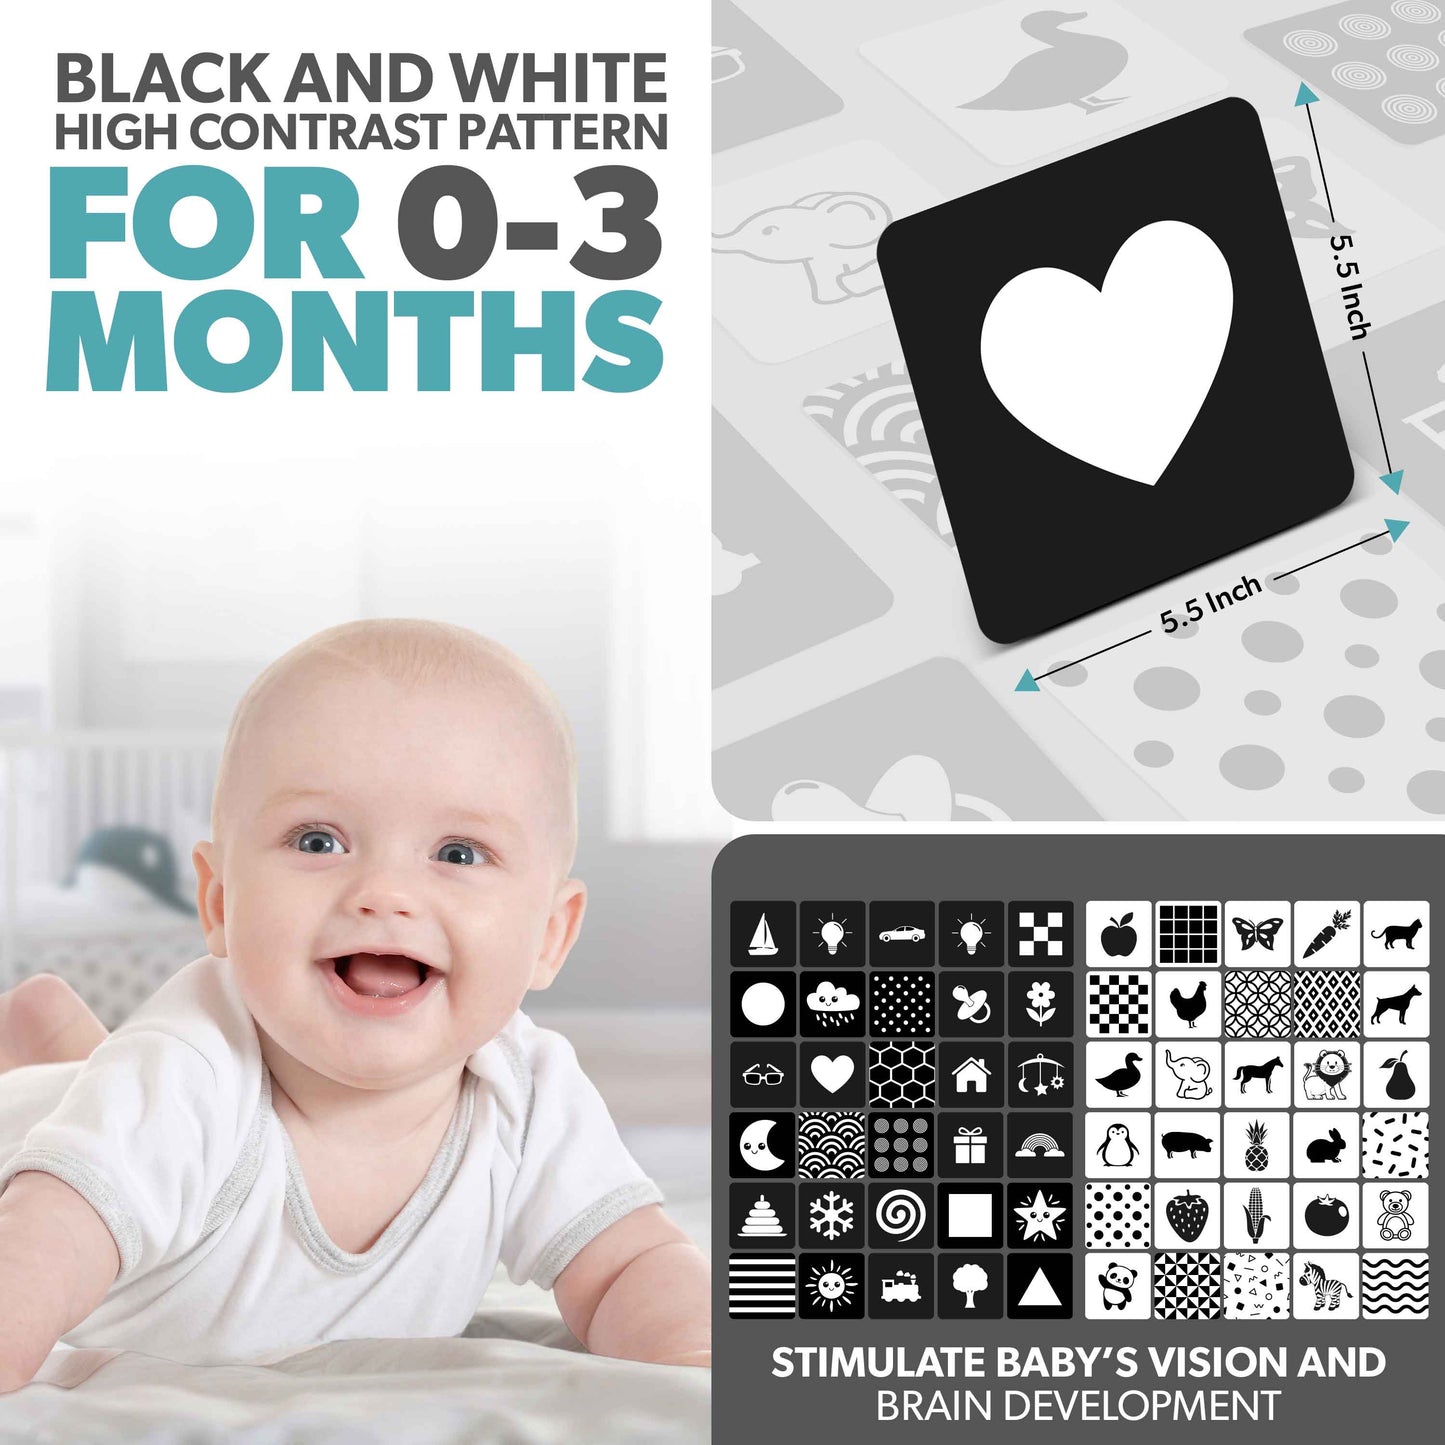 Baby Sensory Cards - 60 Black and White High Contrast Baby Flash Cards